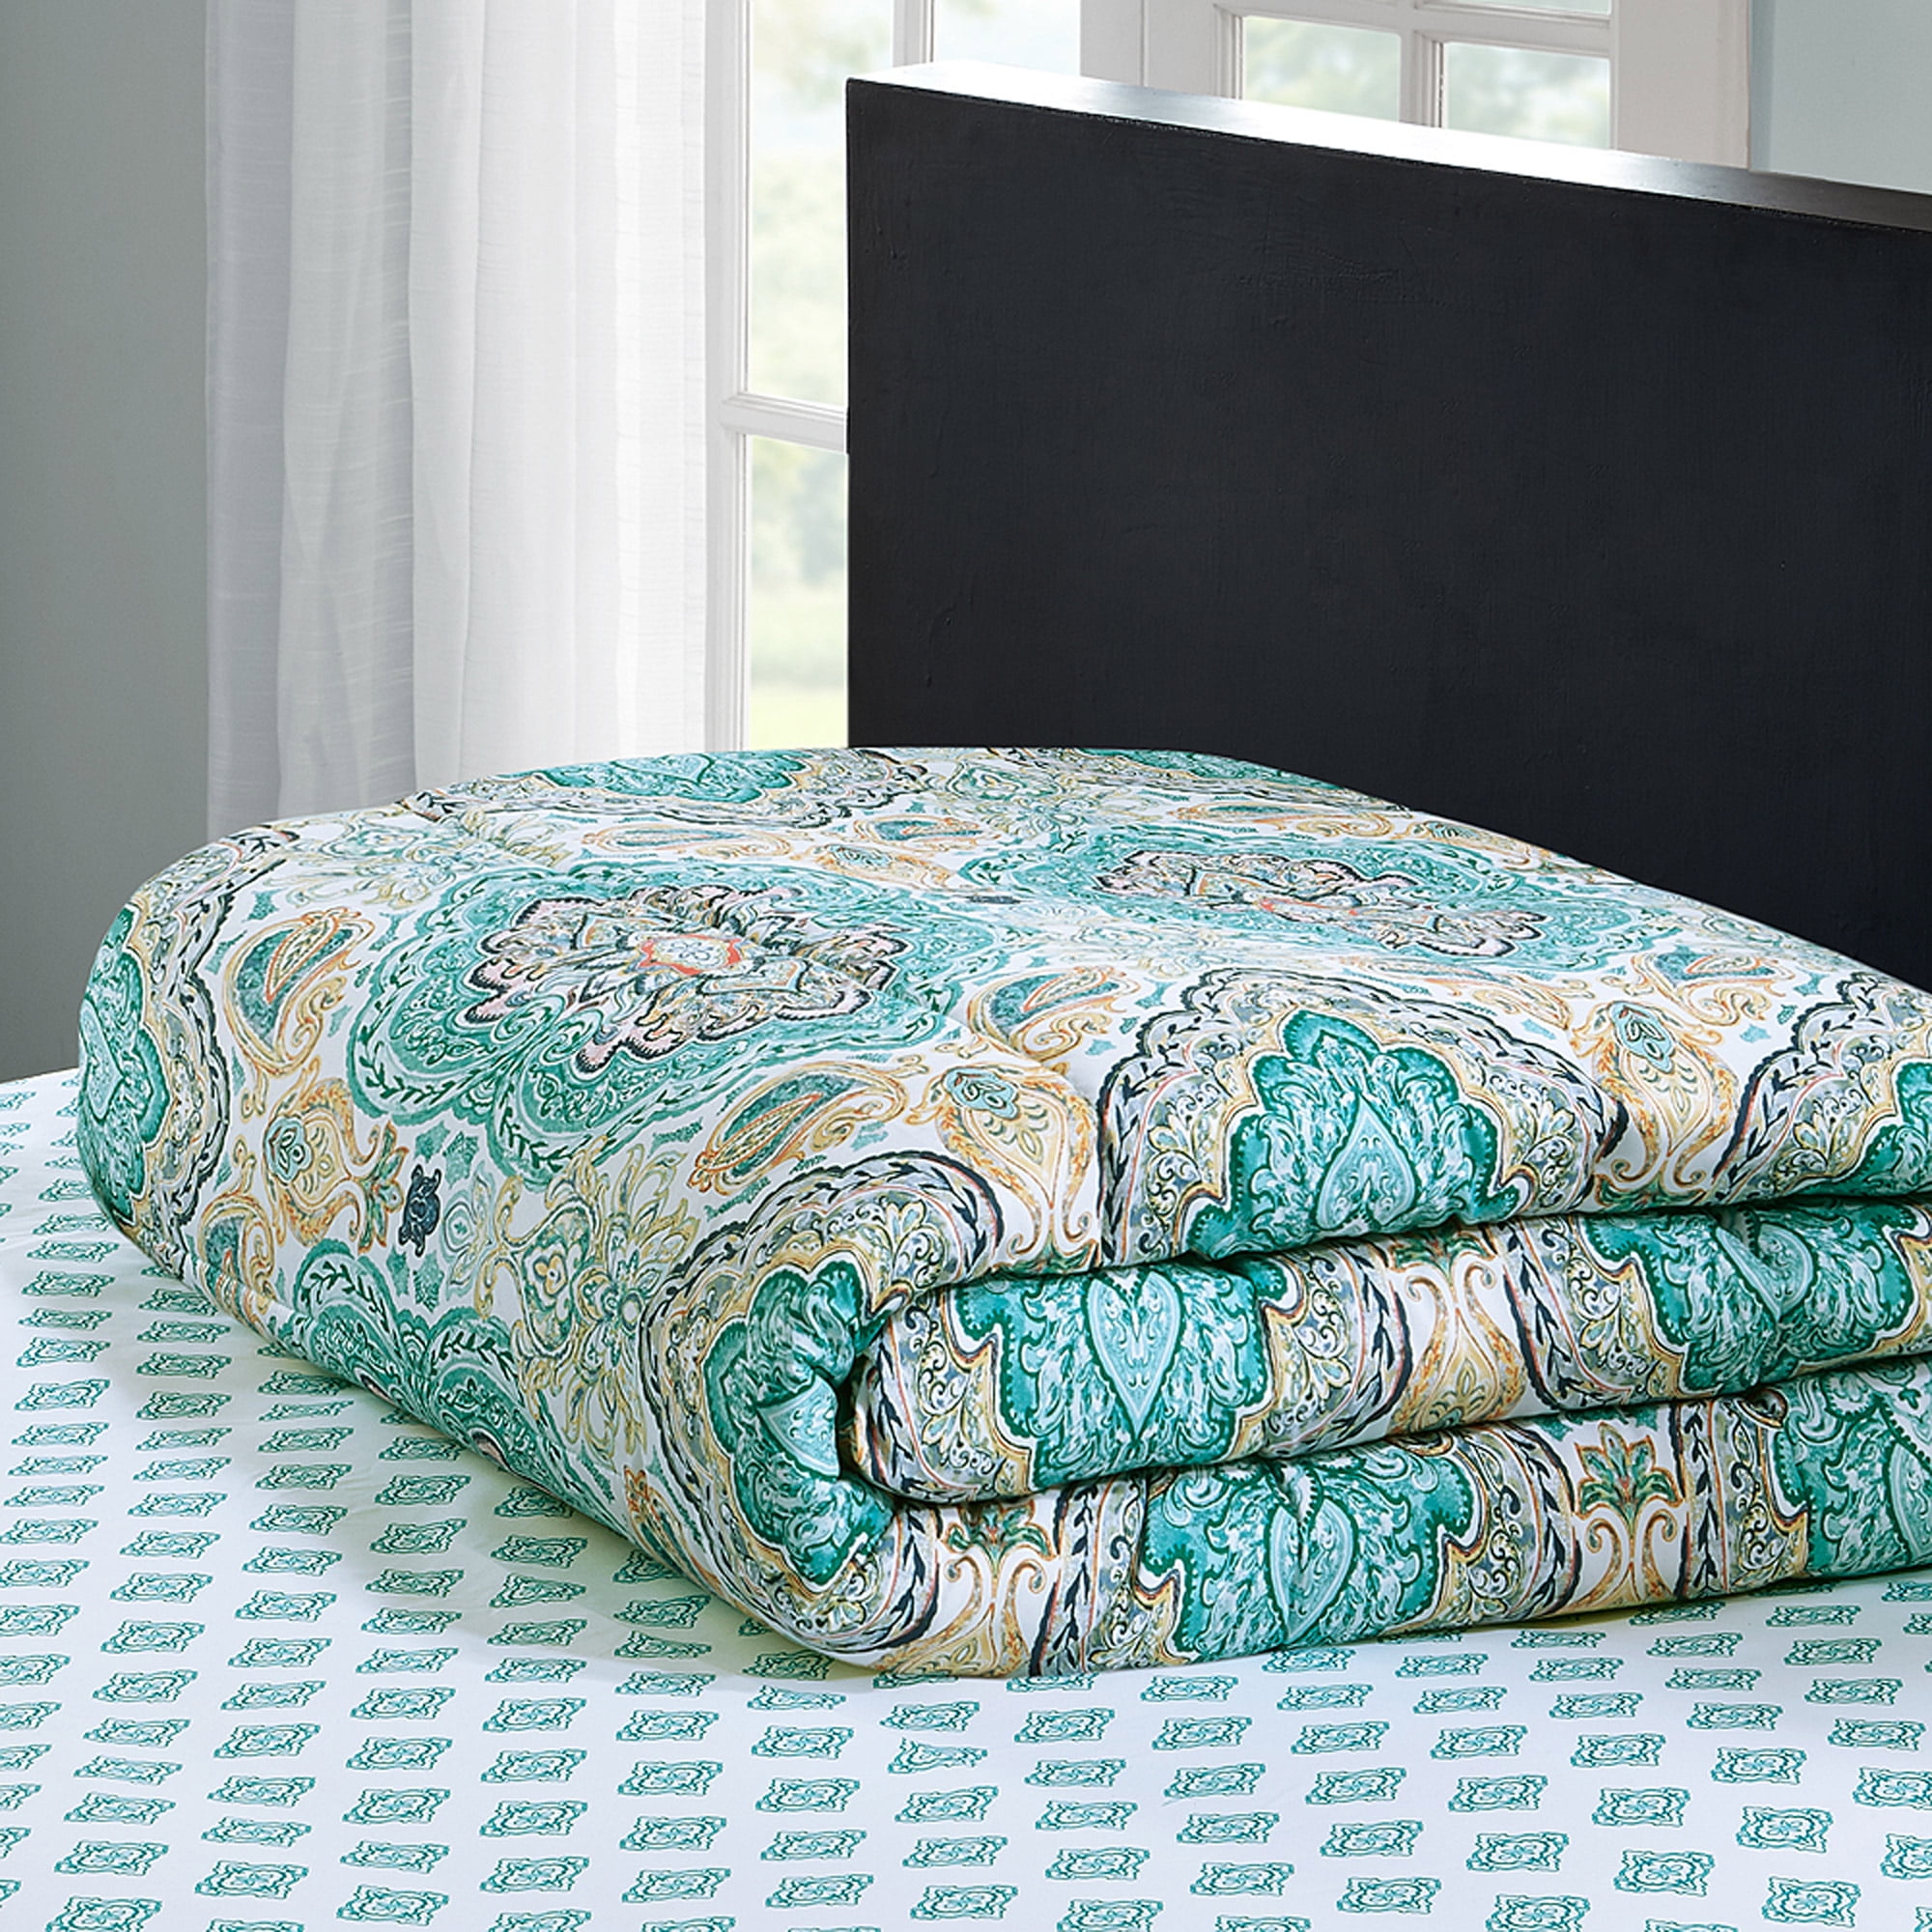 Mainstays Monique Paisley Bed In A Bag Comforter Set Twin